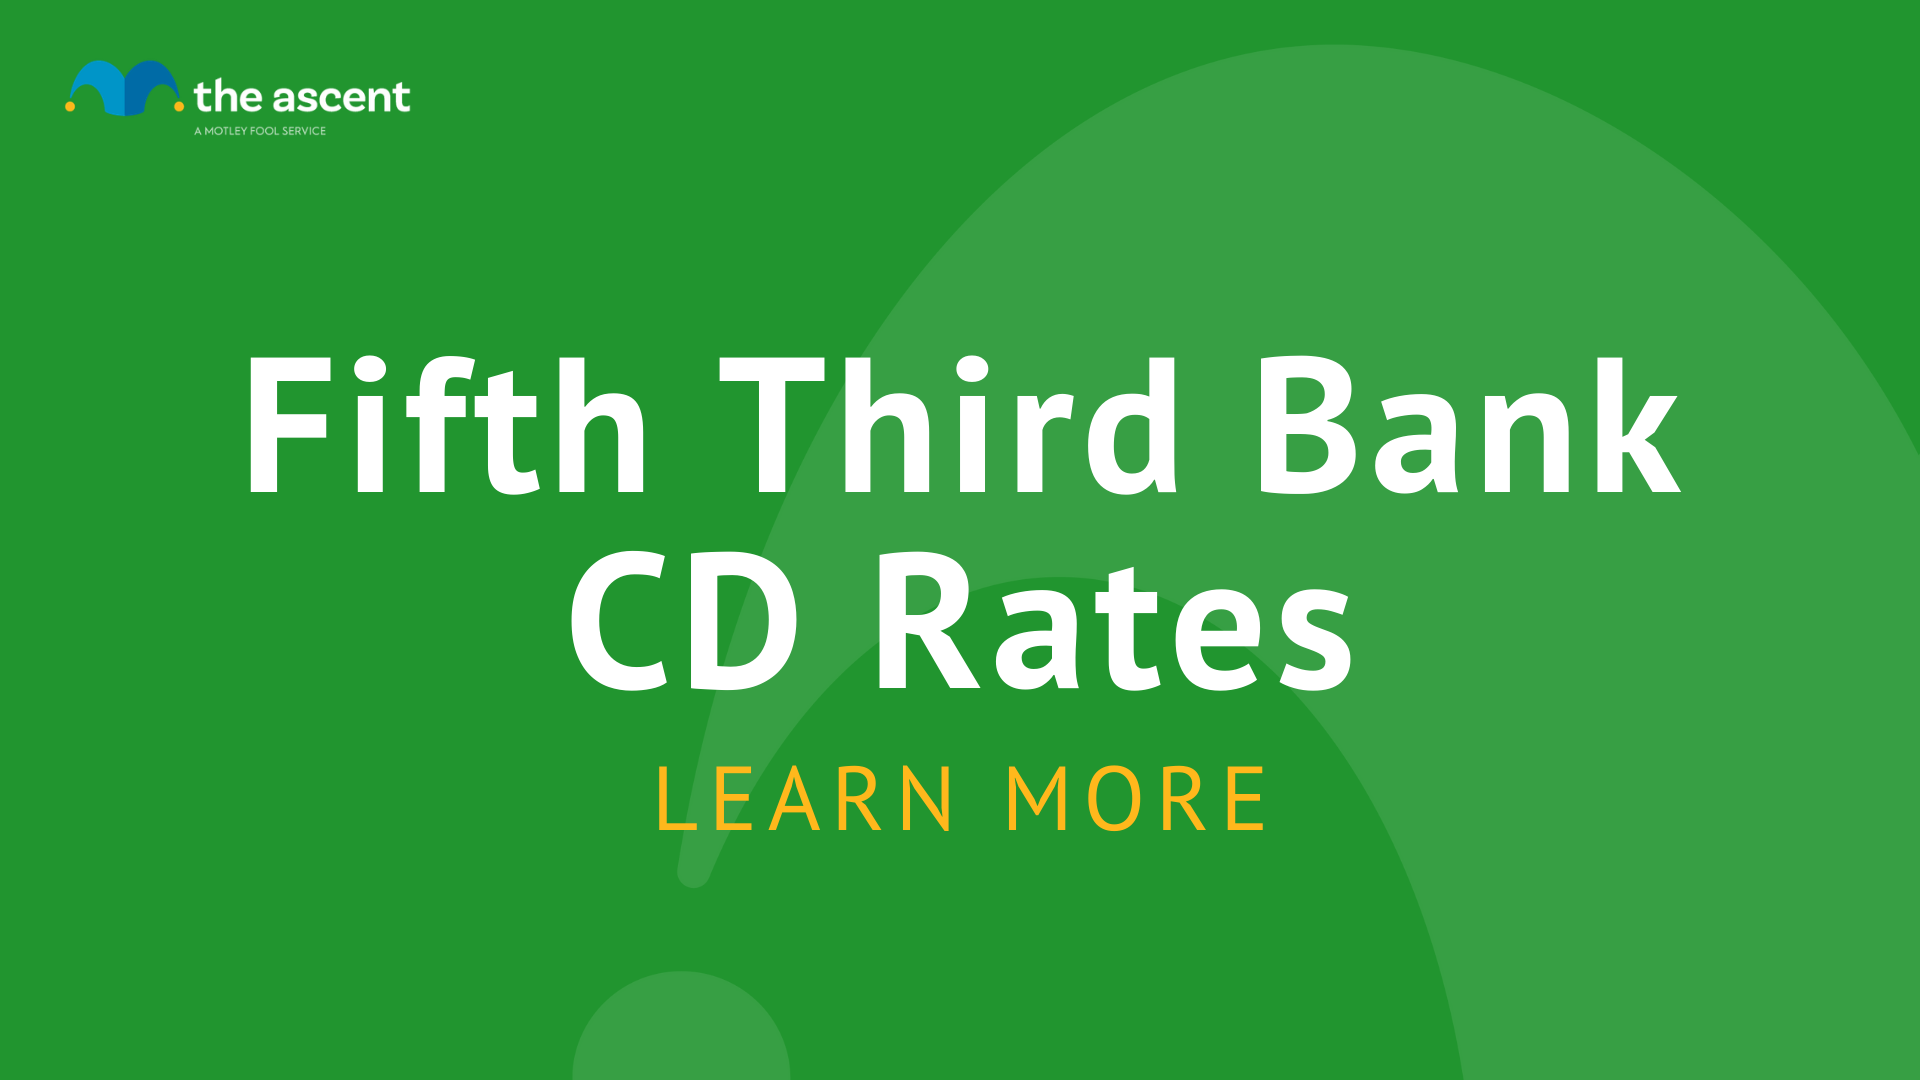 Fifth Third Bank CD Rates for February 2023